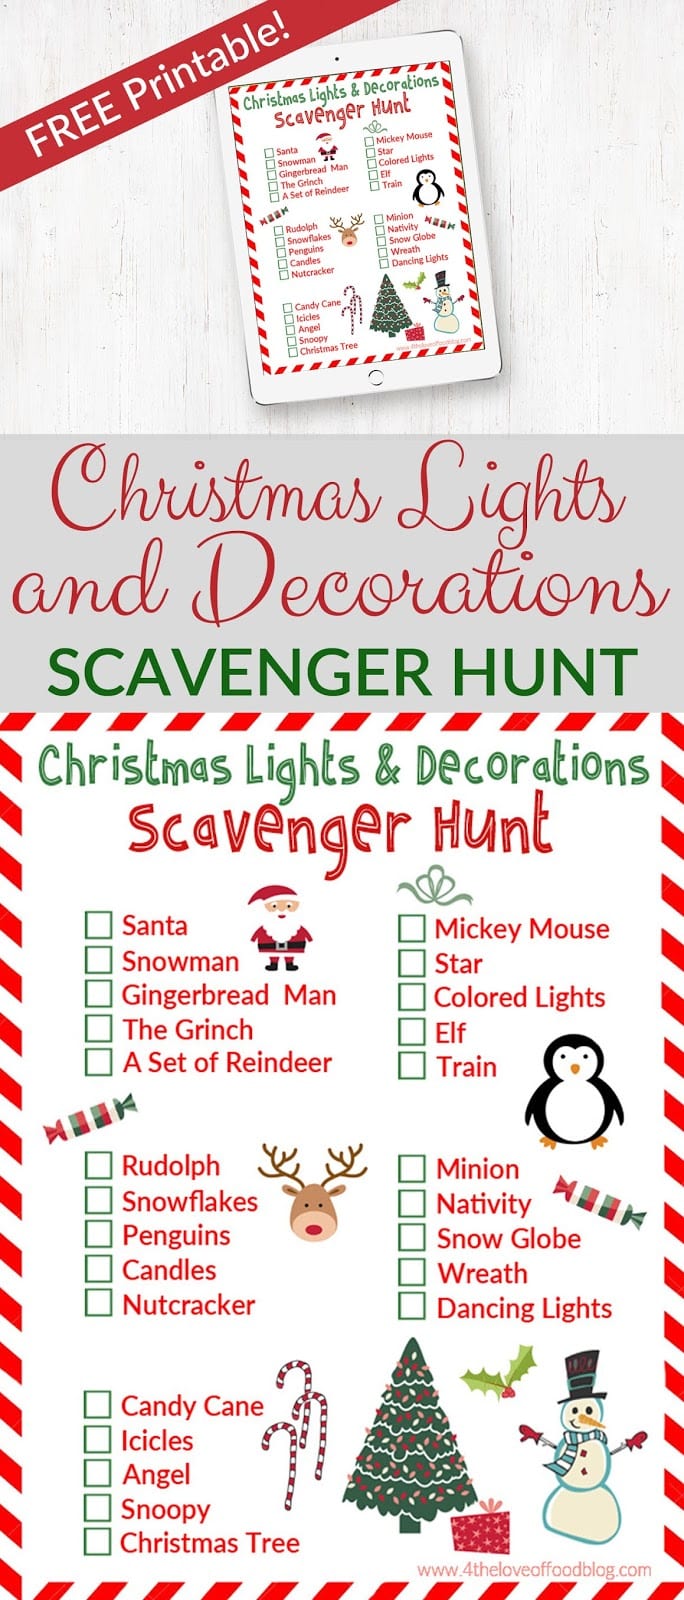 Christmas Lights and Decorations Scavenger Hunt - Free Printable! - For ...